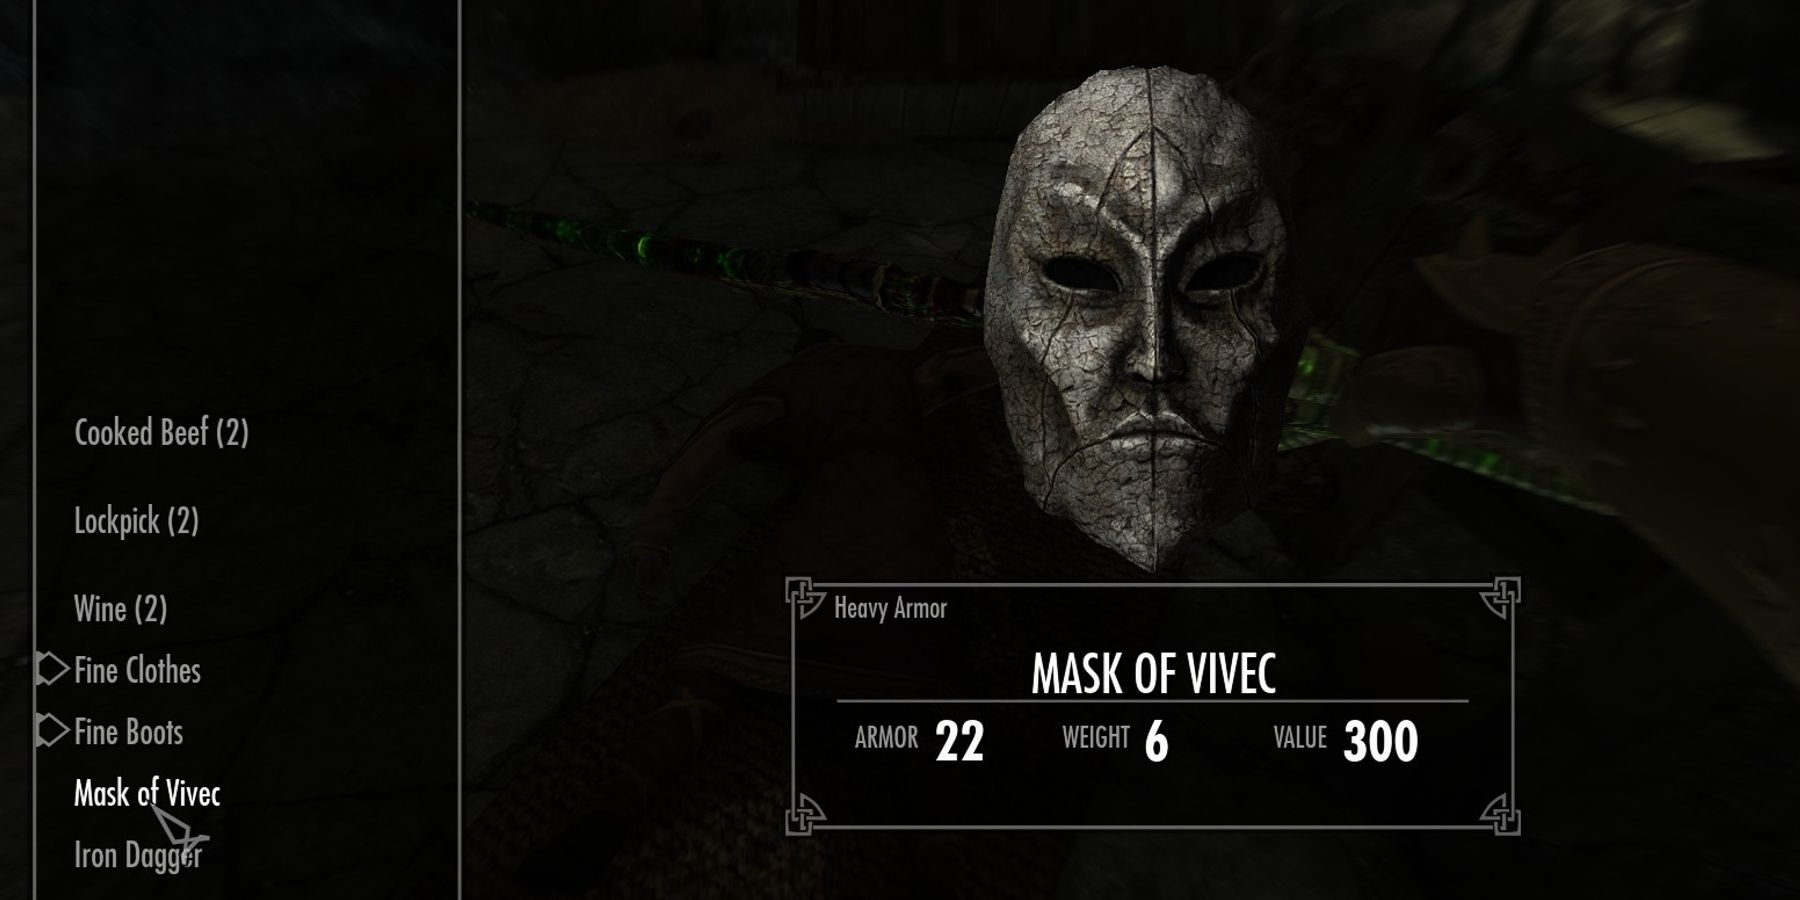 Skyrim Anniversary Ghosts of the Tribunal Mask of Vivec Questline